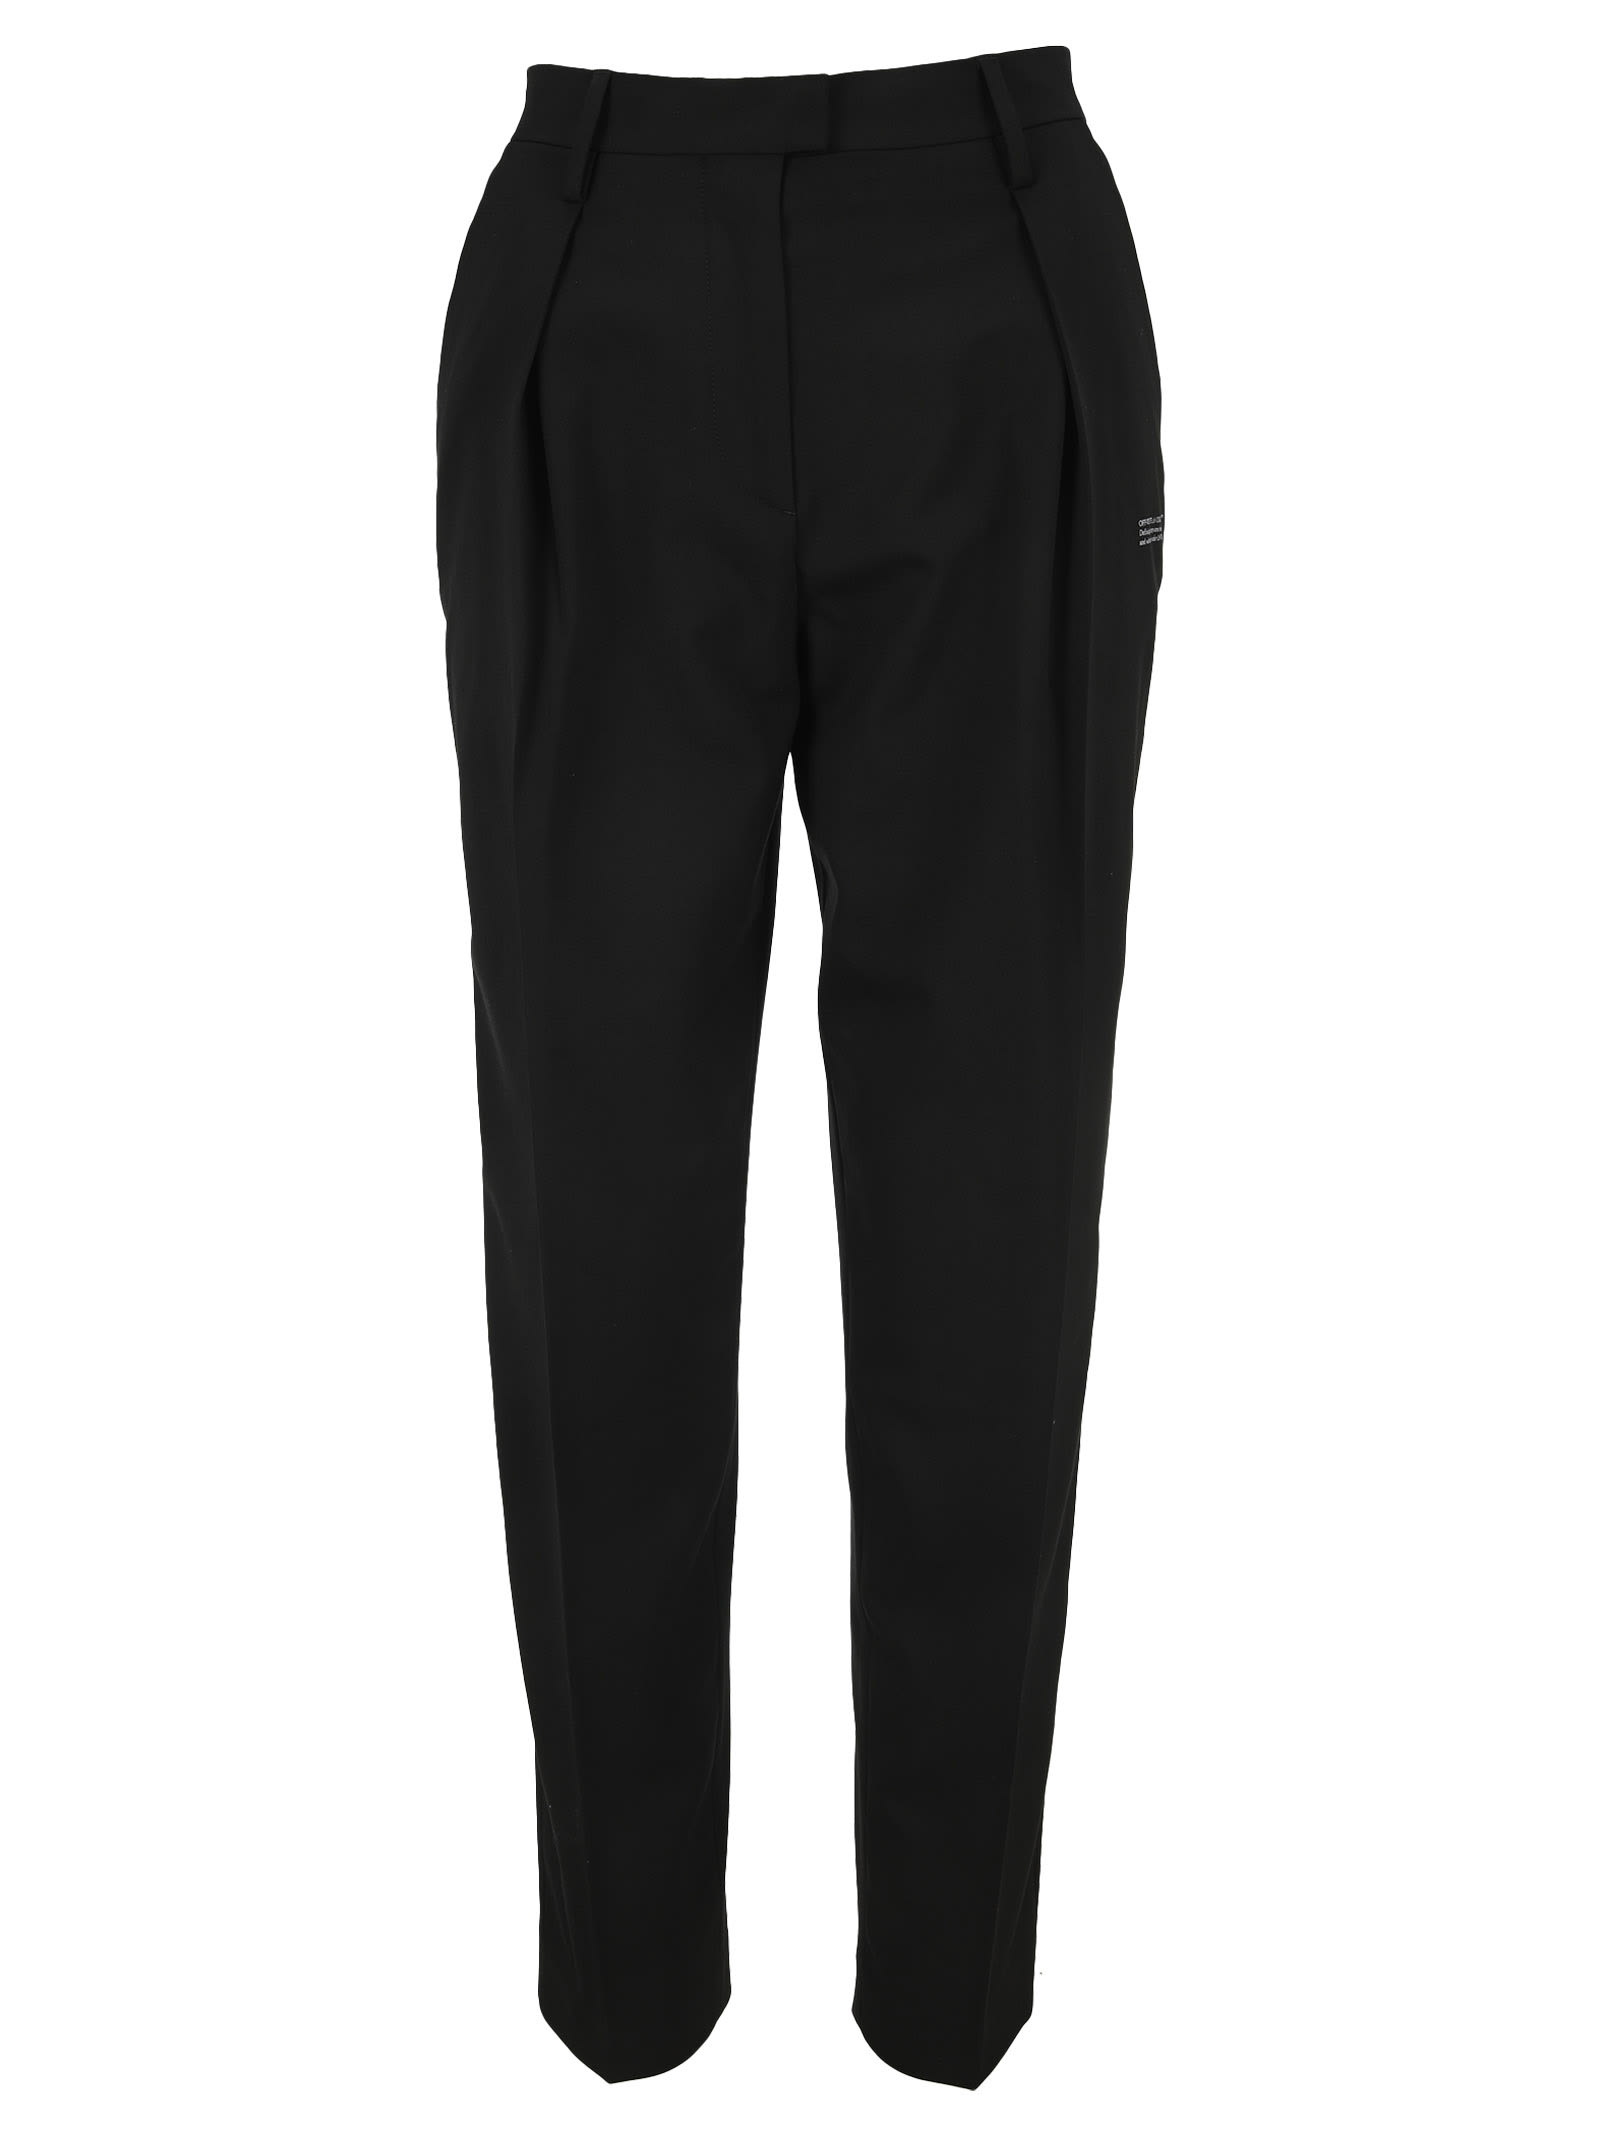 OFF-WHITE OFF WHITE FORMAL PANTS,OWCA129S21FAB0011000